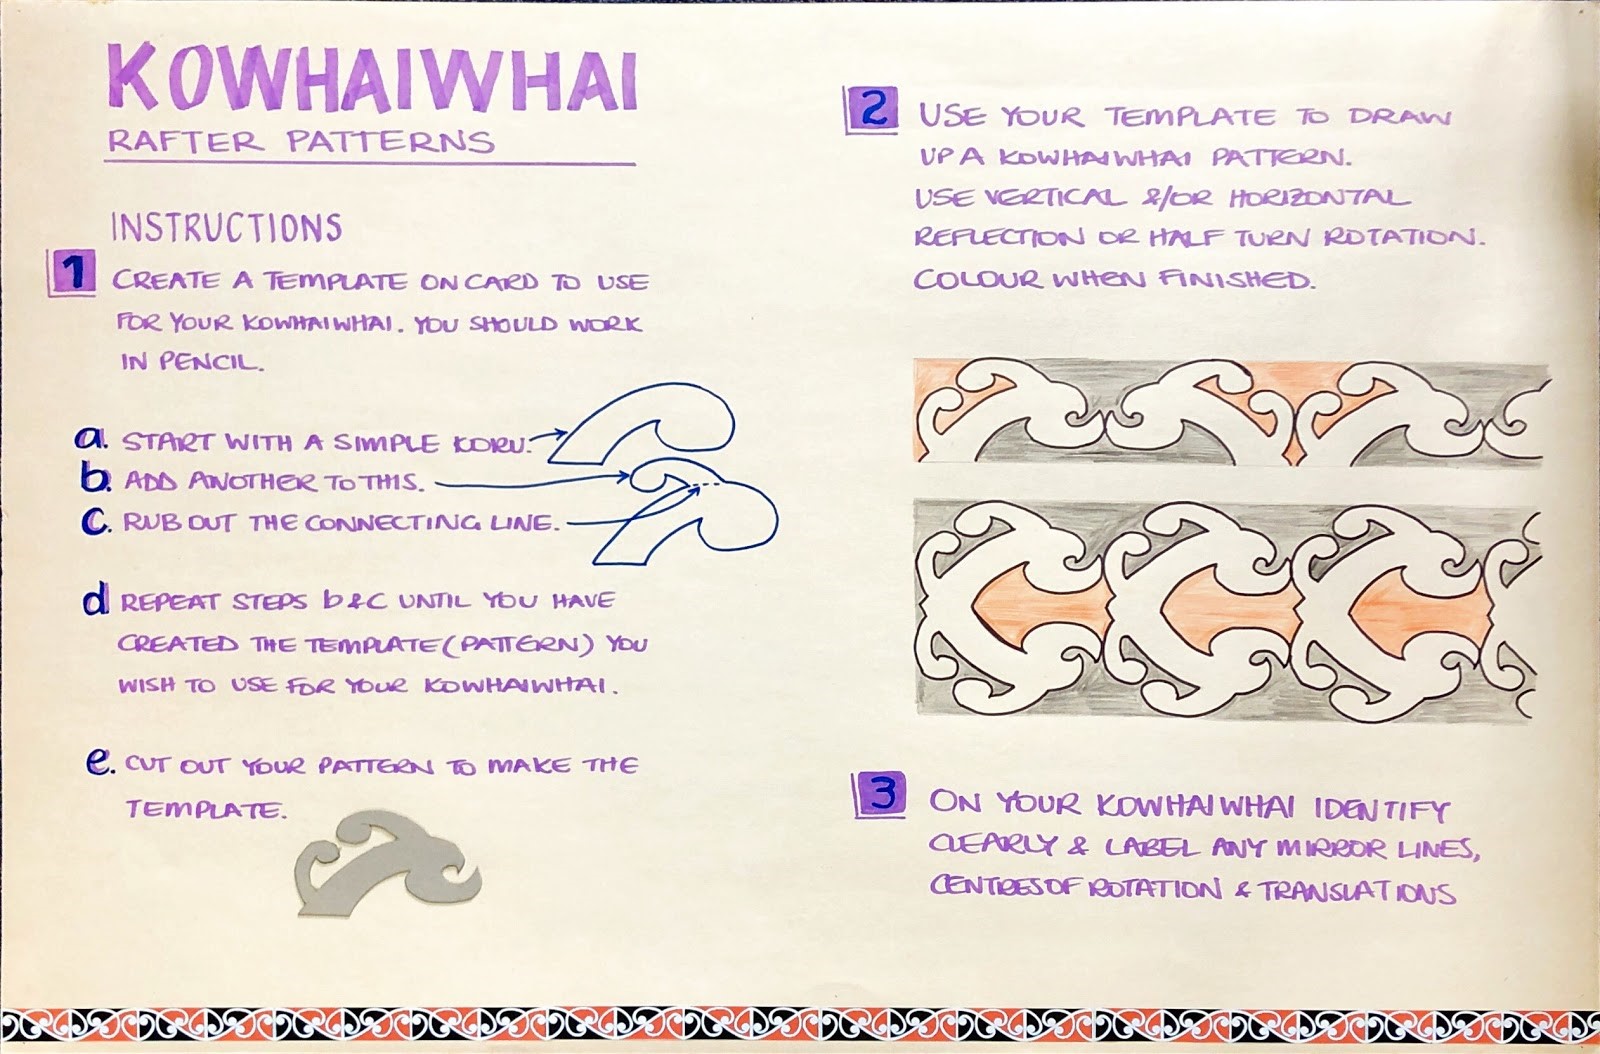 Instructions for making kōwhaiwhai rafter patterns.